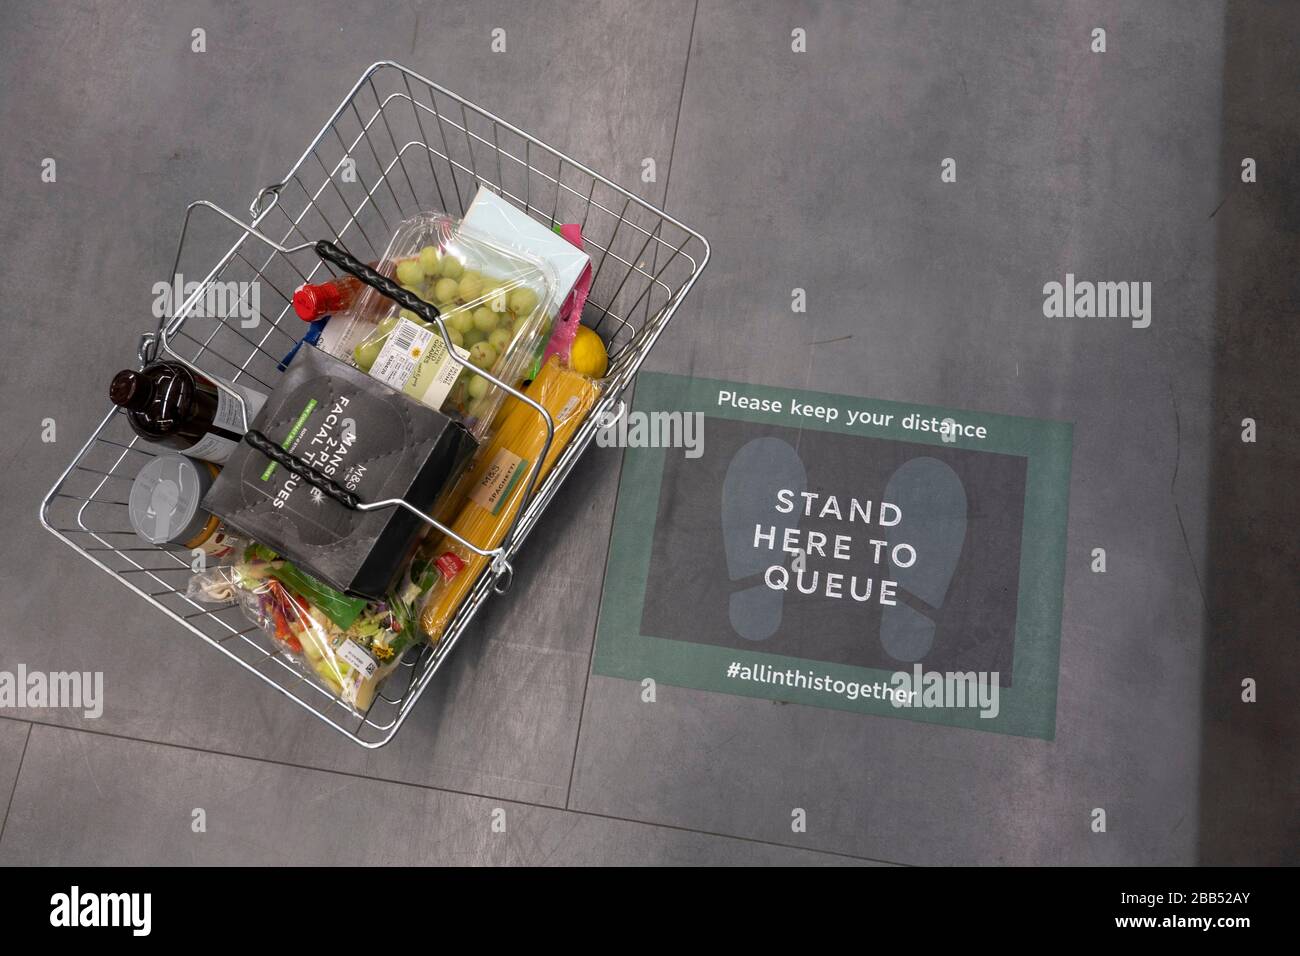 Streatham, UK. 30th Mar, 2020. Stand Here To Queue signs on the floor at a Marks & Spencer supermarket in Streatham in South London, England. ( Credit: Sam Mellish/Alamy Live News Stock Photo